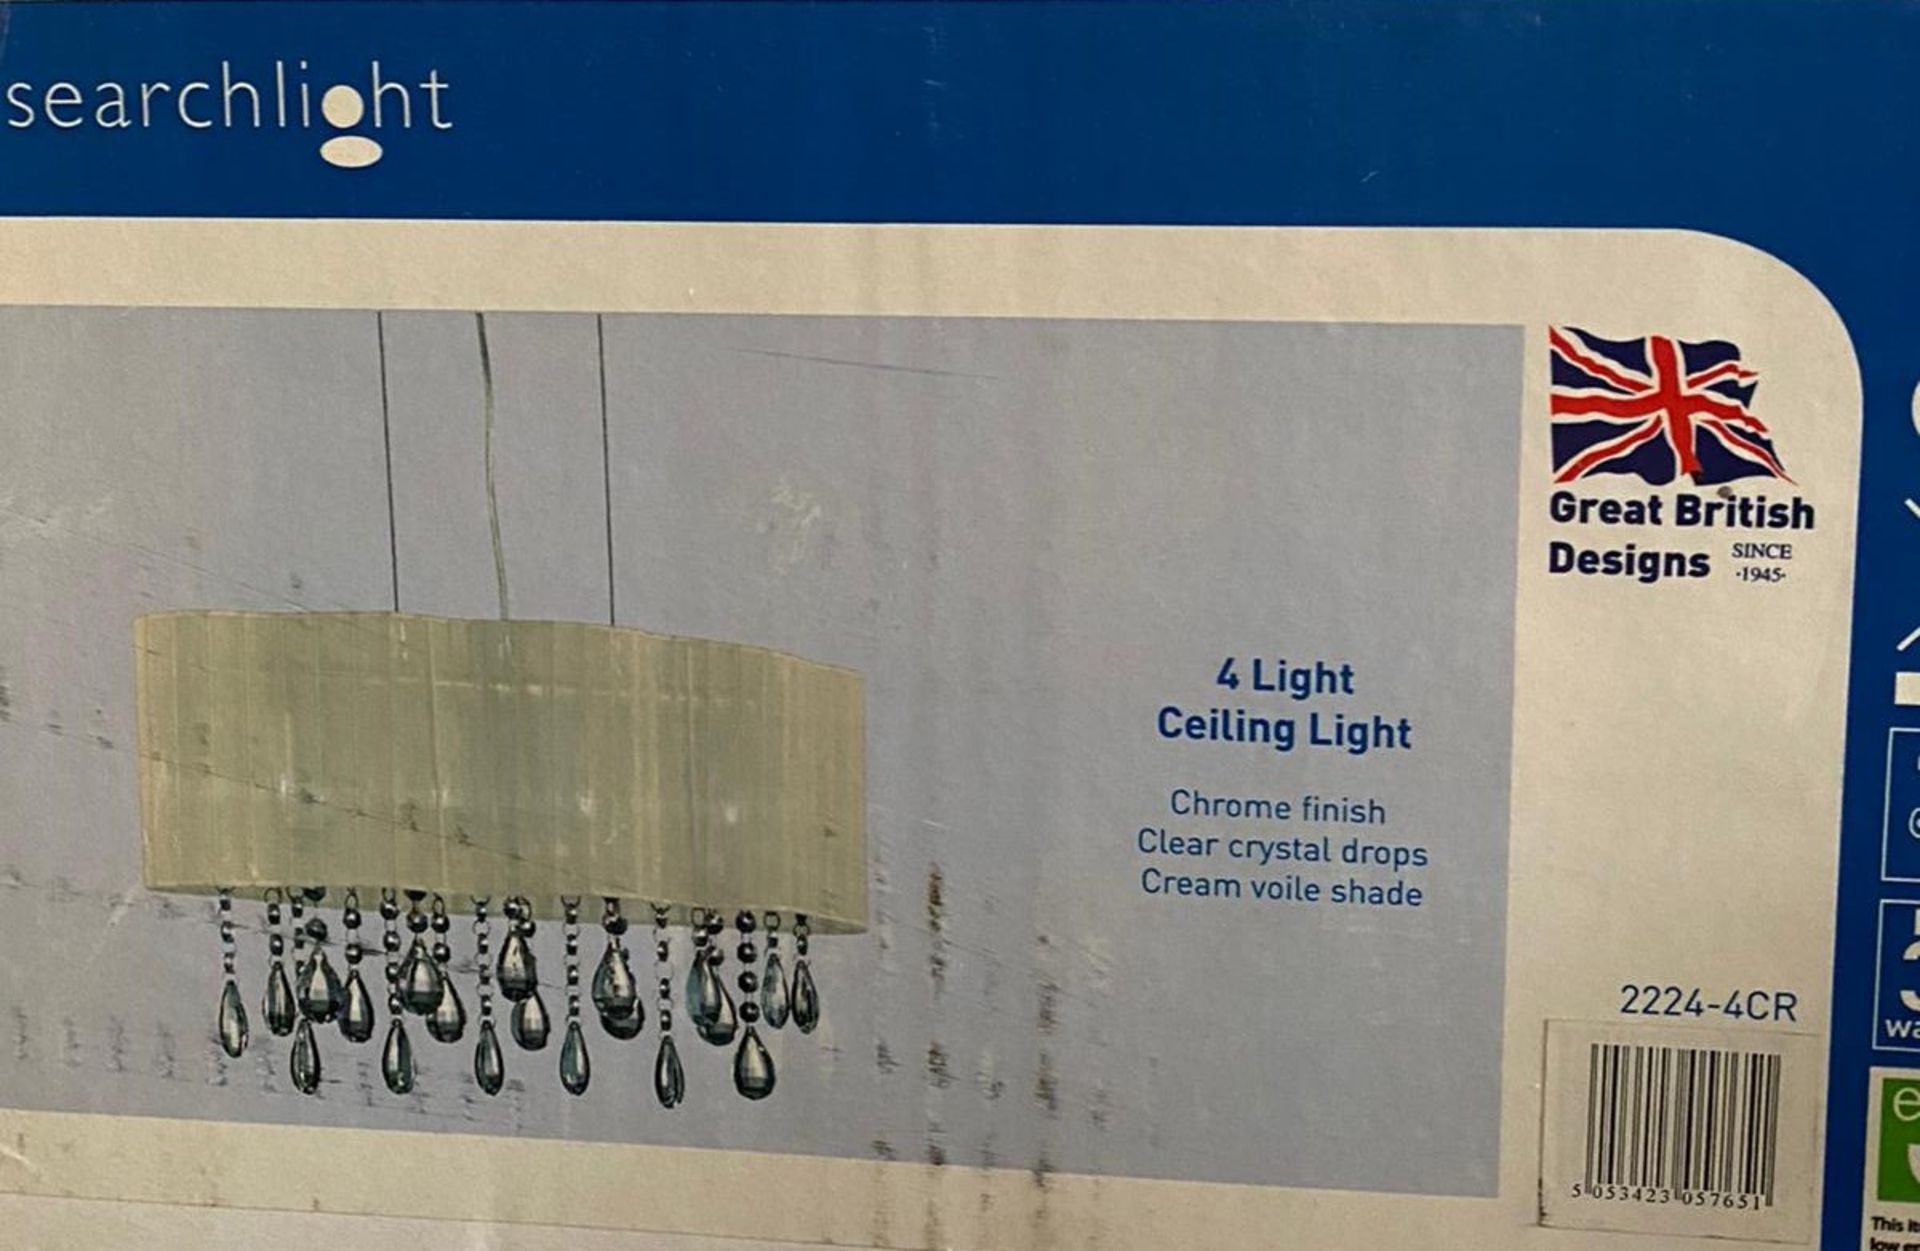 1 x Searchlight 4 light ceiling light in chrome - Ref: 2224-4CR - New boxed- CL323 - RRP: £264.00